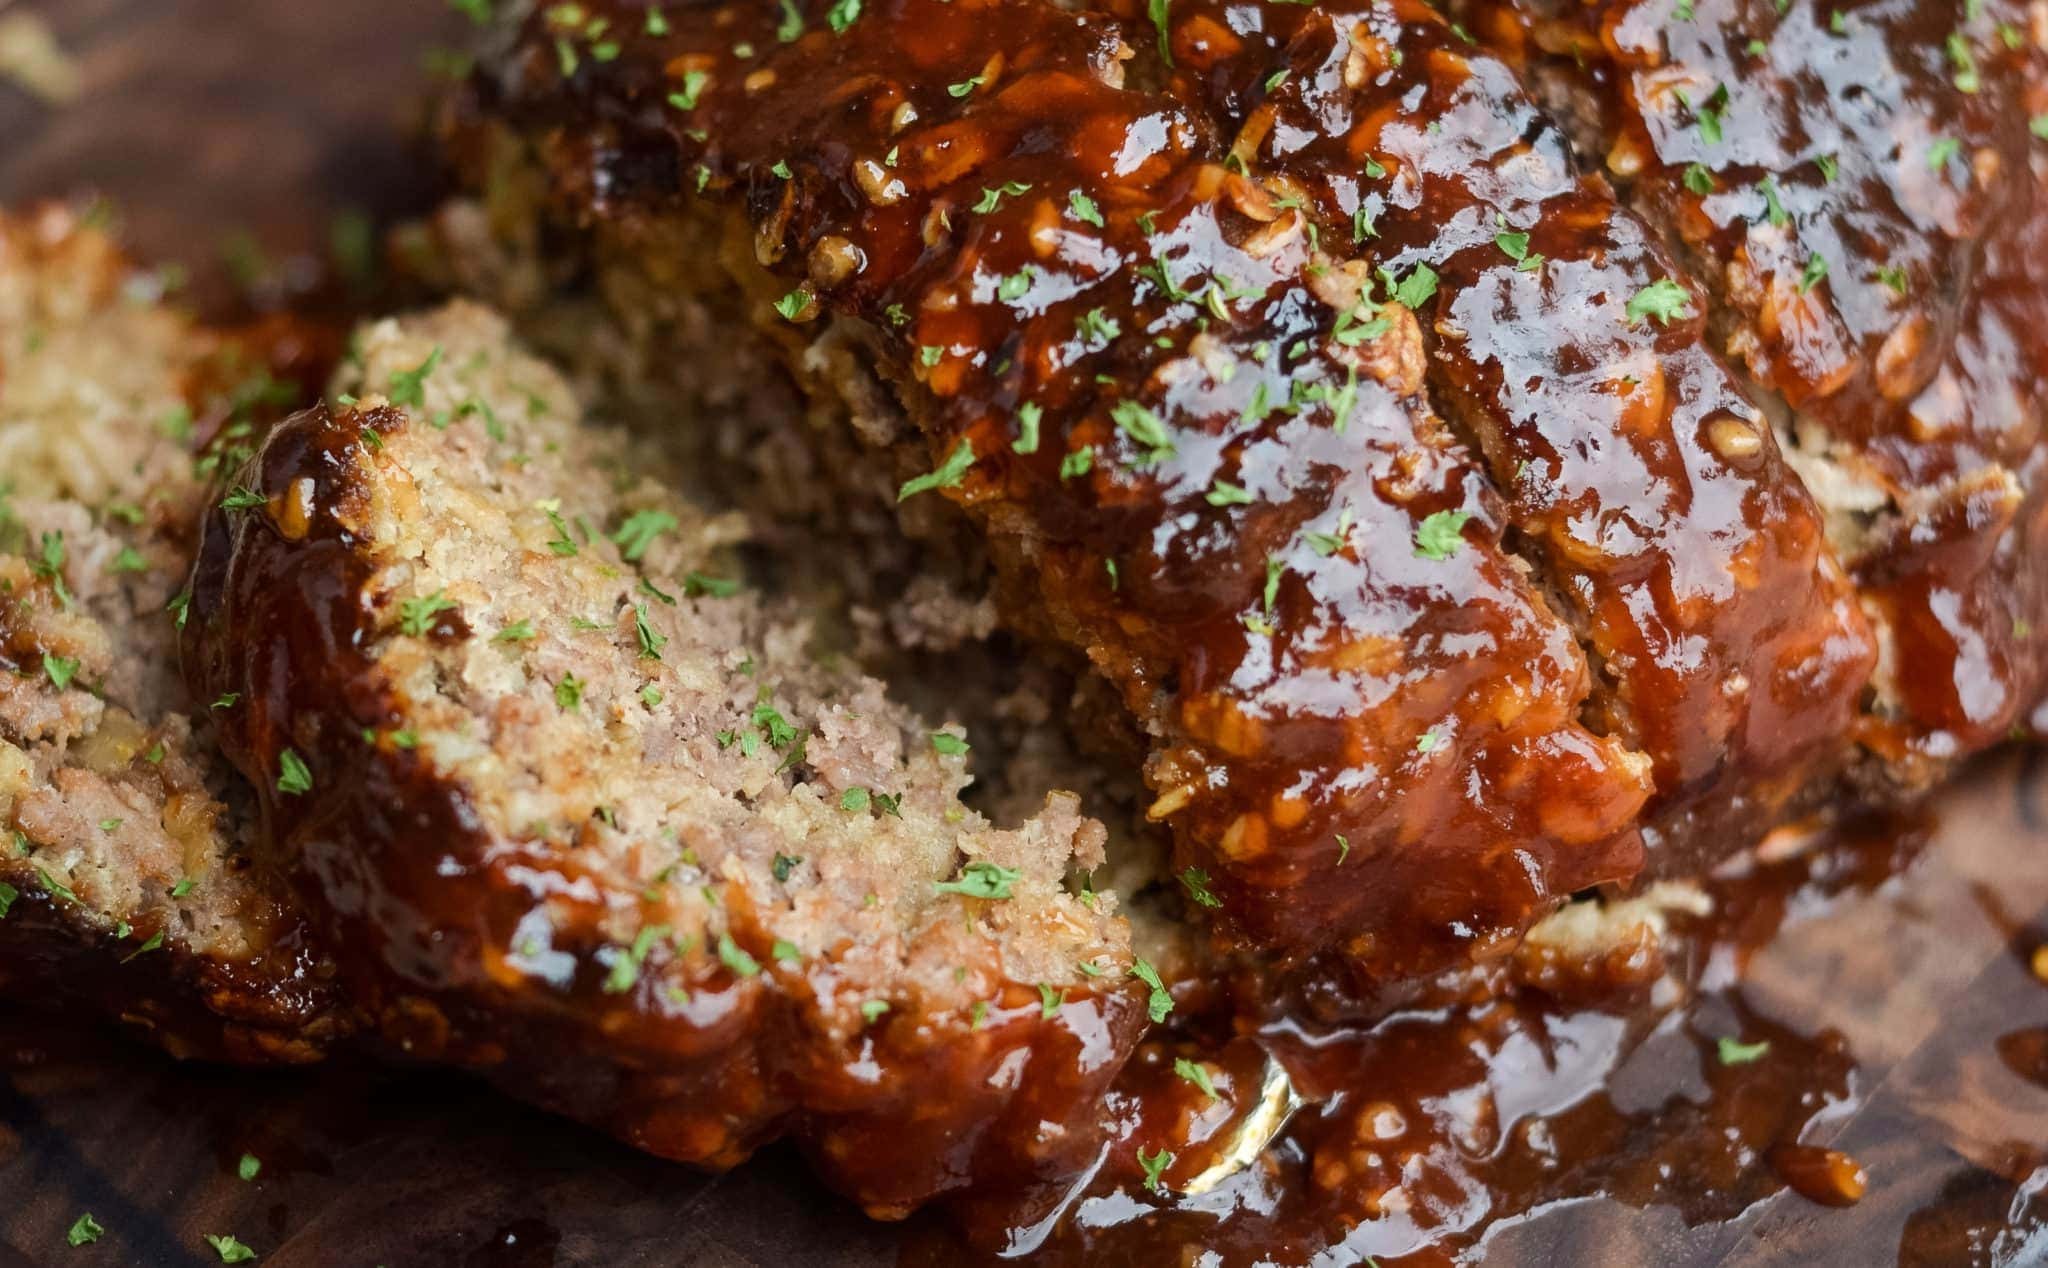 Pizookie monkey bread made in a cast iron skillet